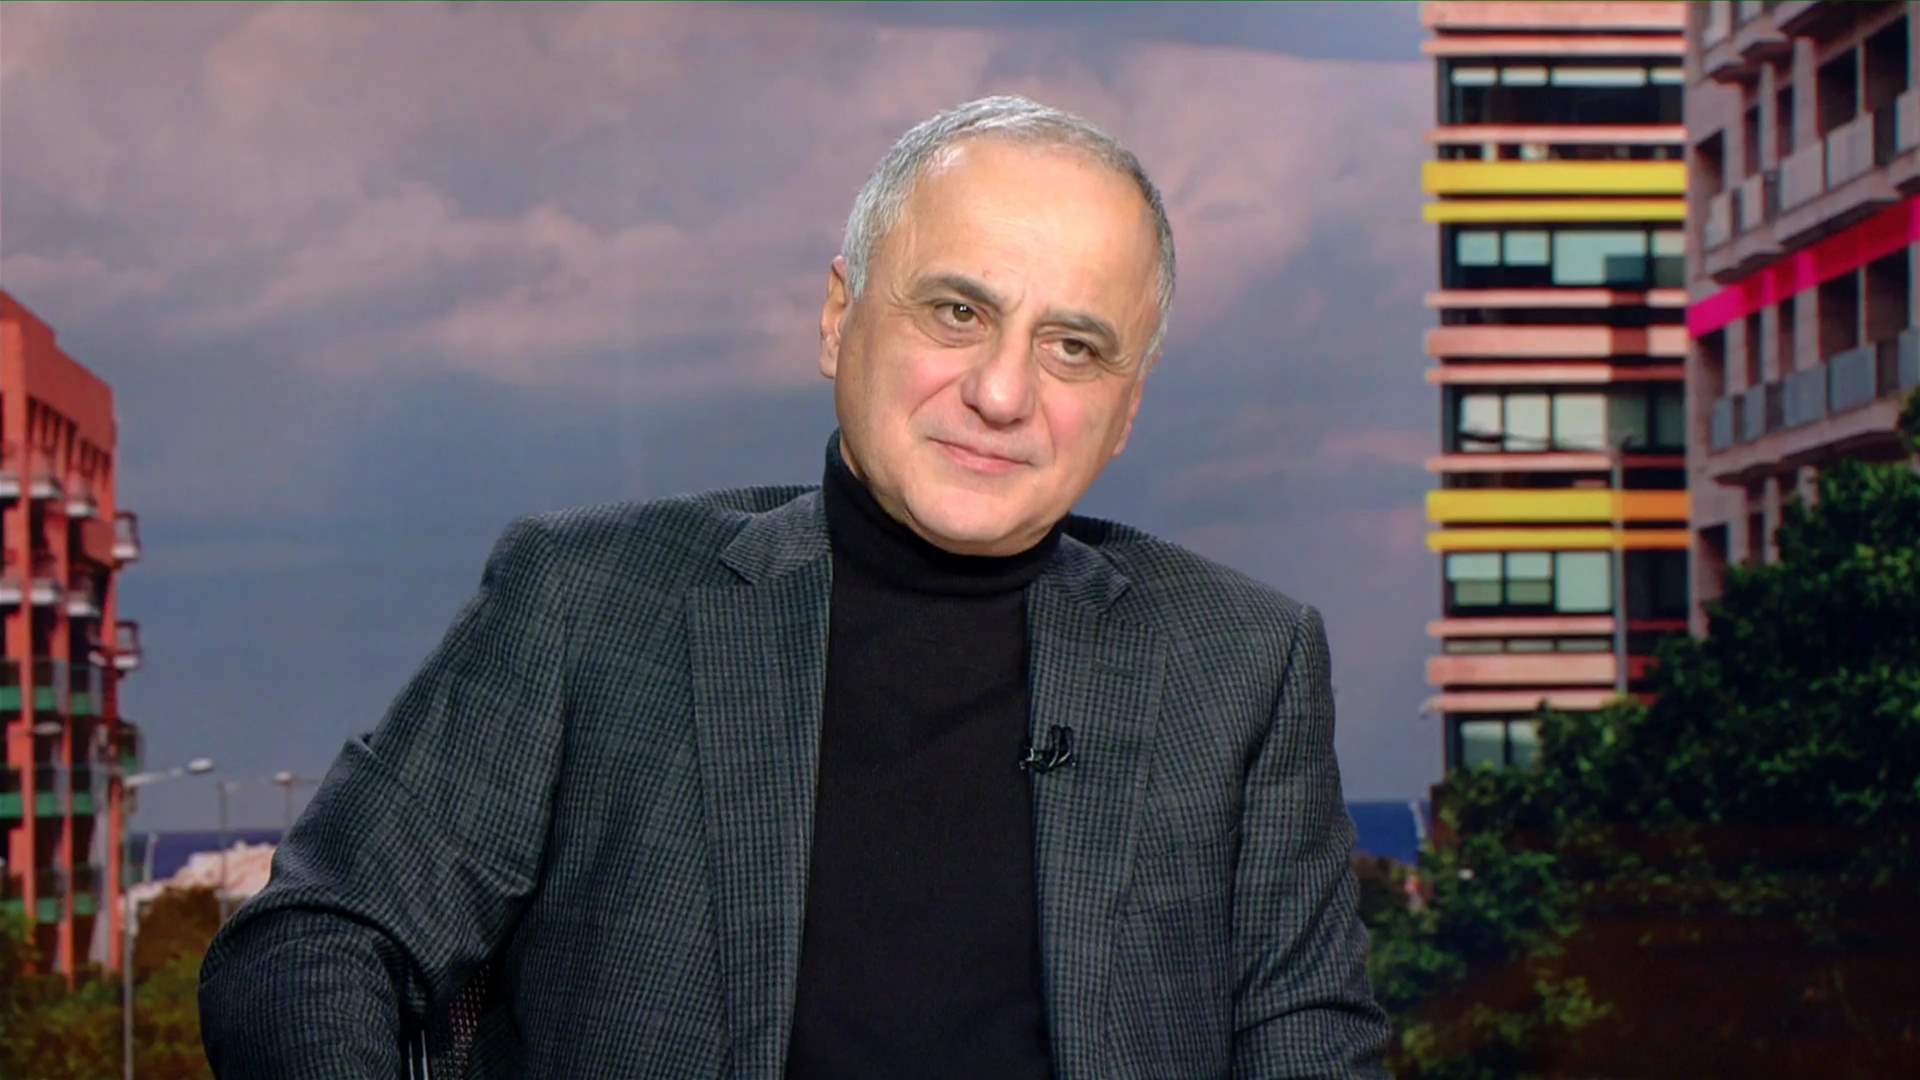 Fouad Abu Nader to LBCI: Christians have not lost their role, we need to consider a new approach to managing Lebanon